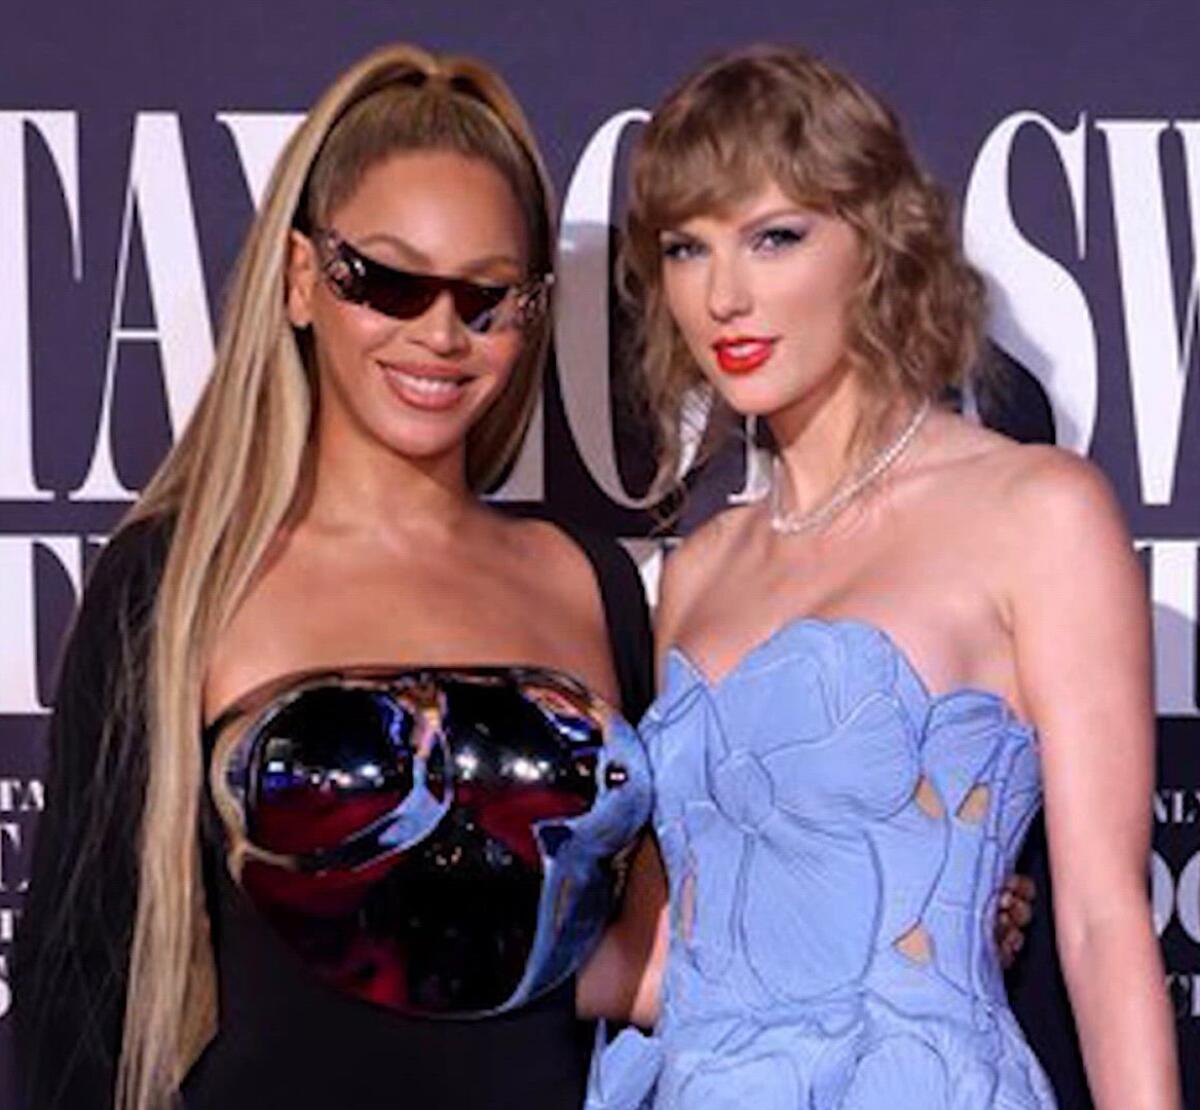 Beyonce in dark glasses and a strapless top and Taylor Swift in a blue dress standing shoulder to shoulder